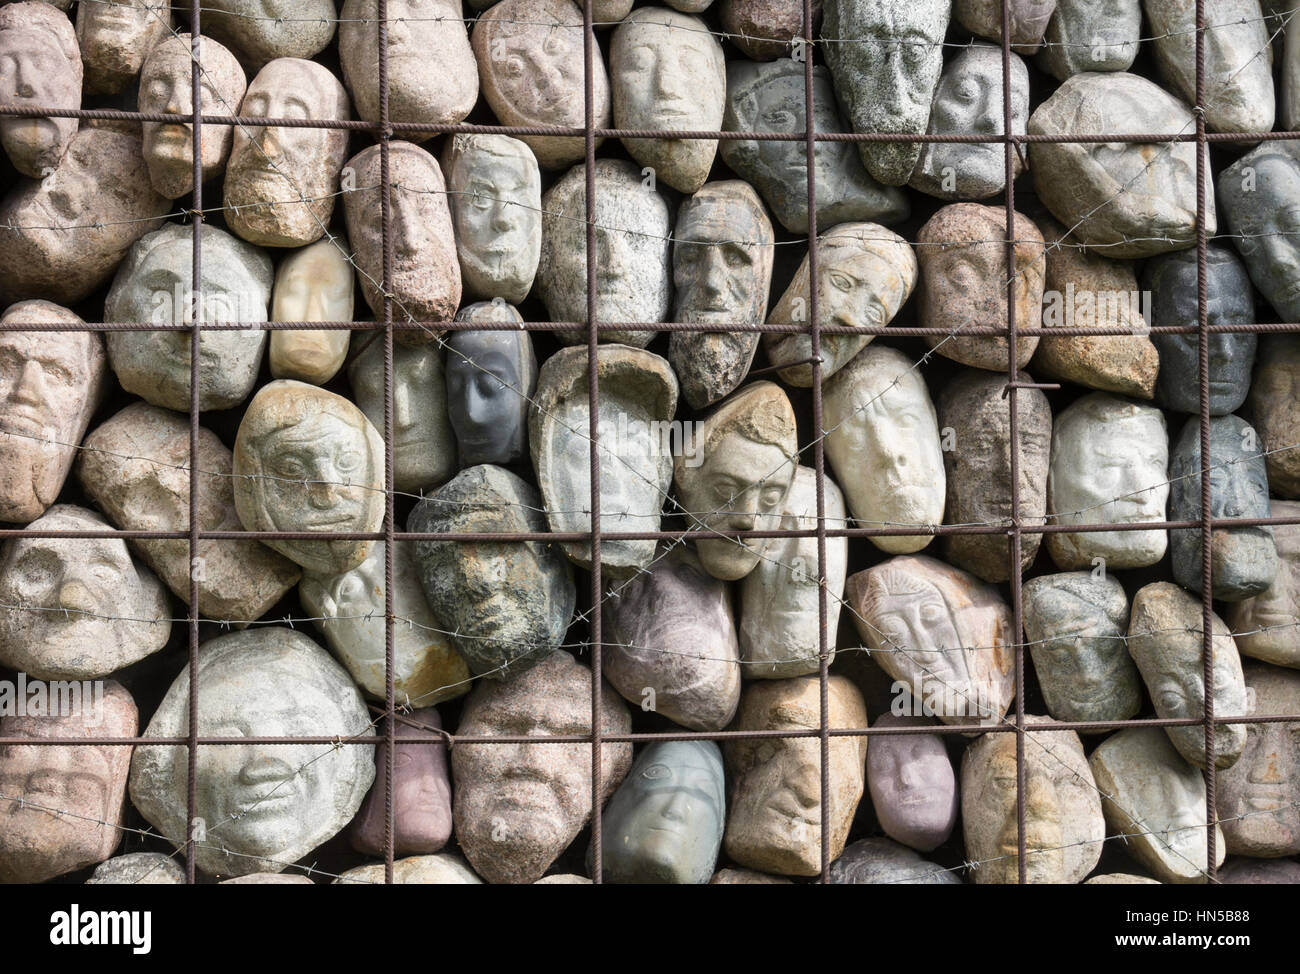 stones with faces Stock Photo